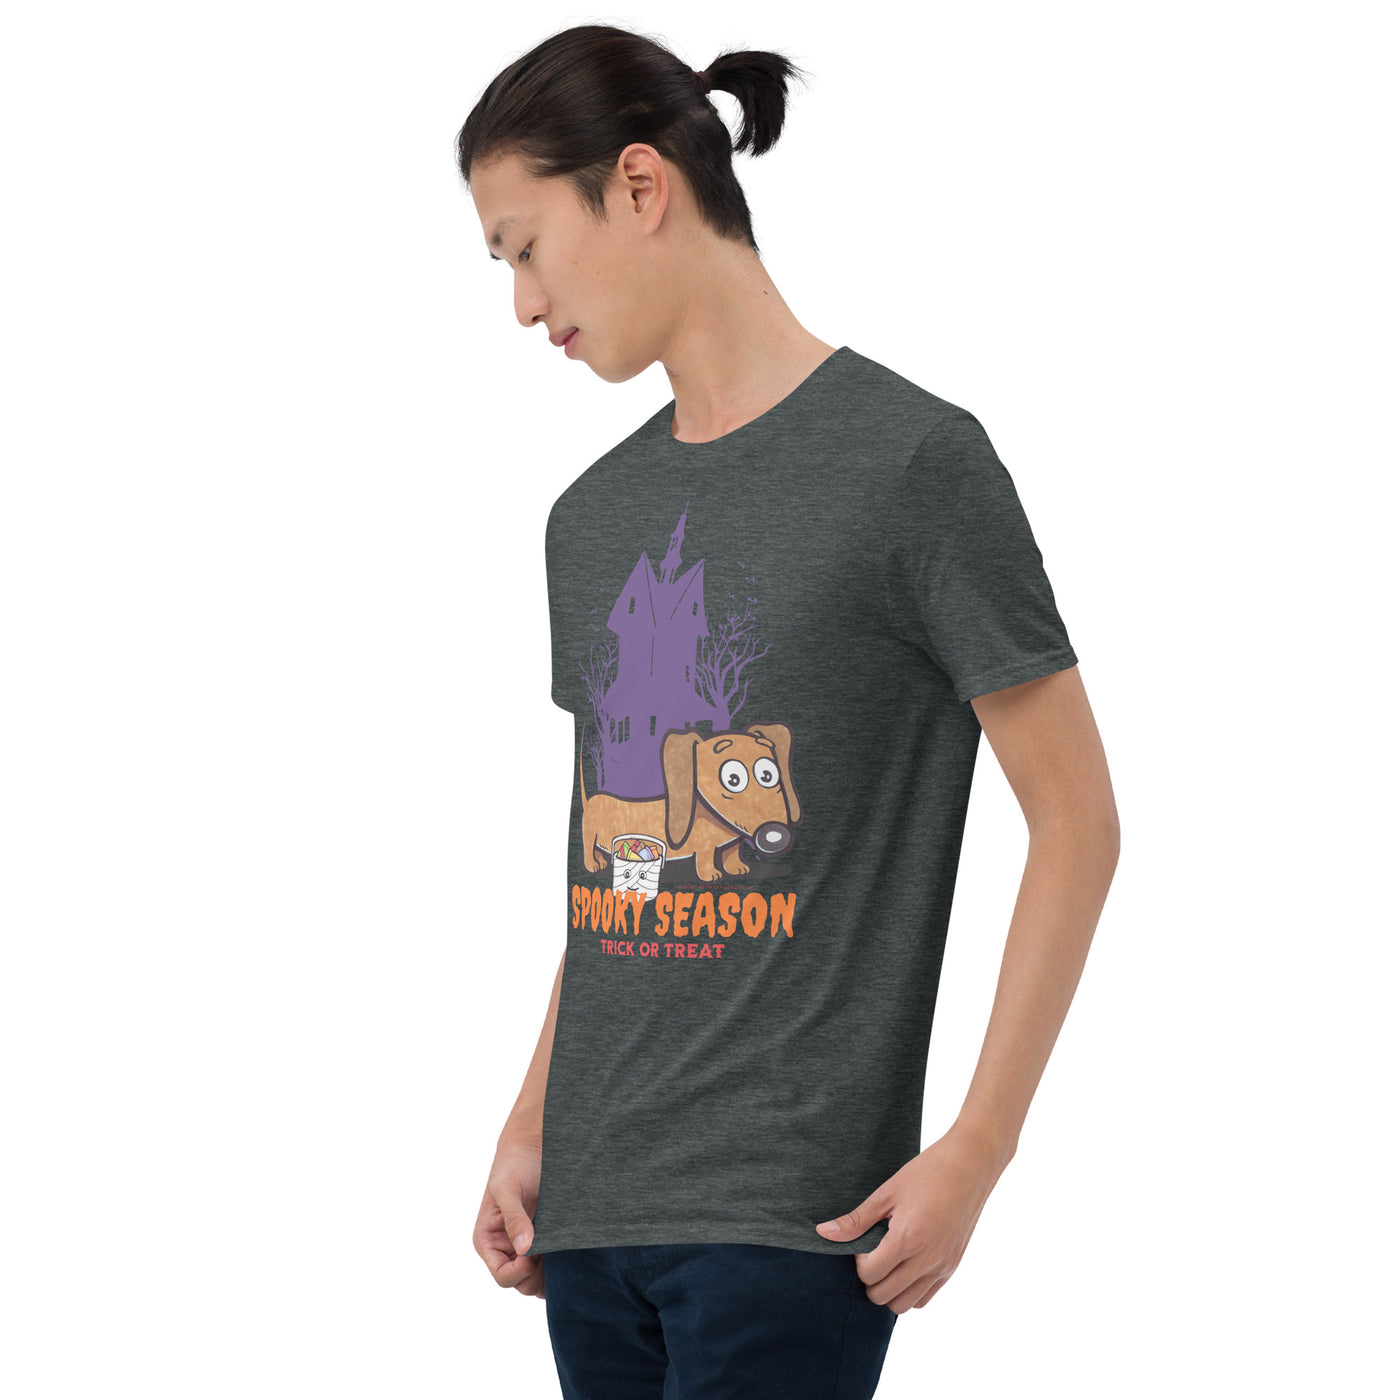 Funny and Cute Doxie Dachshund dog on an adorable spooky Halloween Unisex Tee t shirt